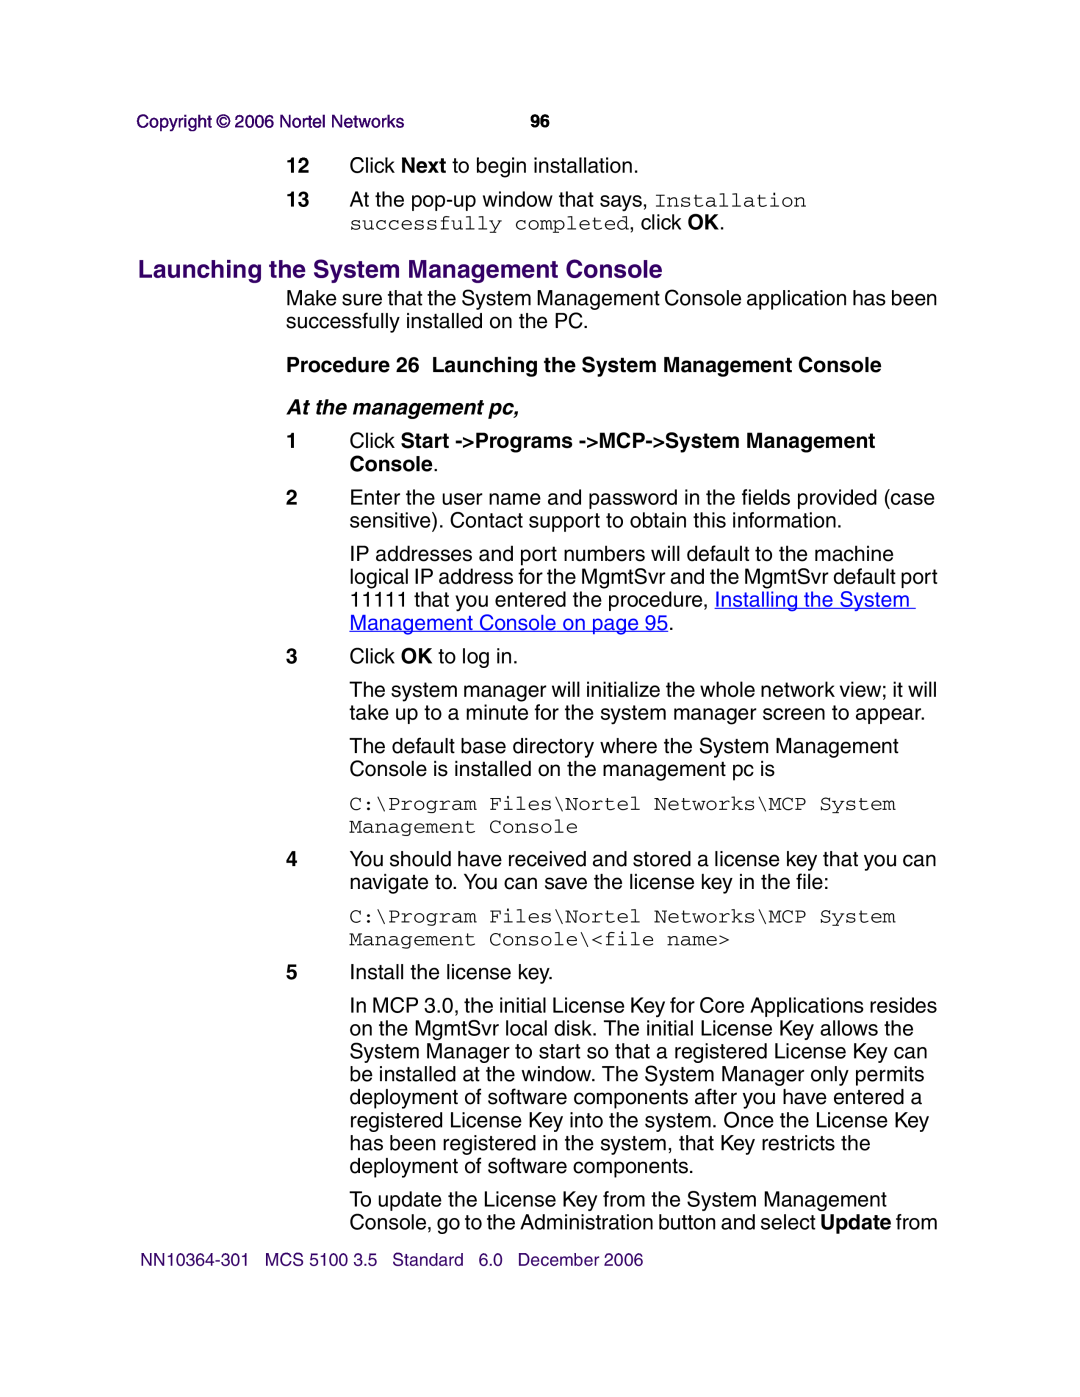 Nortel Networks V100 manual Procedure 26 Launching the System Management Console, At the management pc 